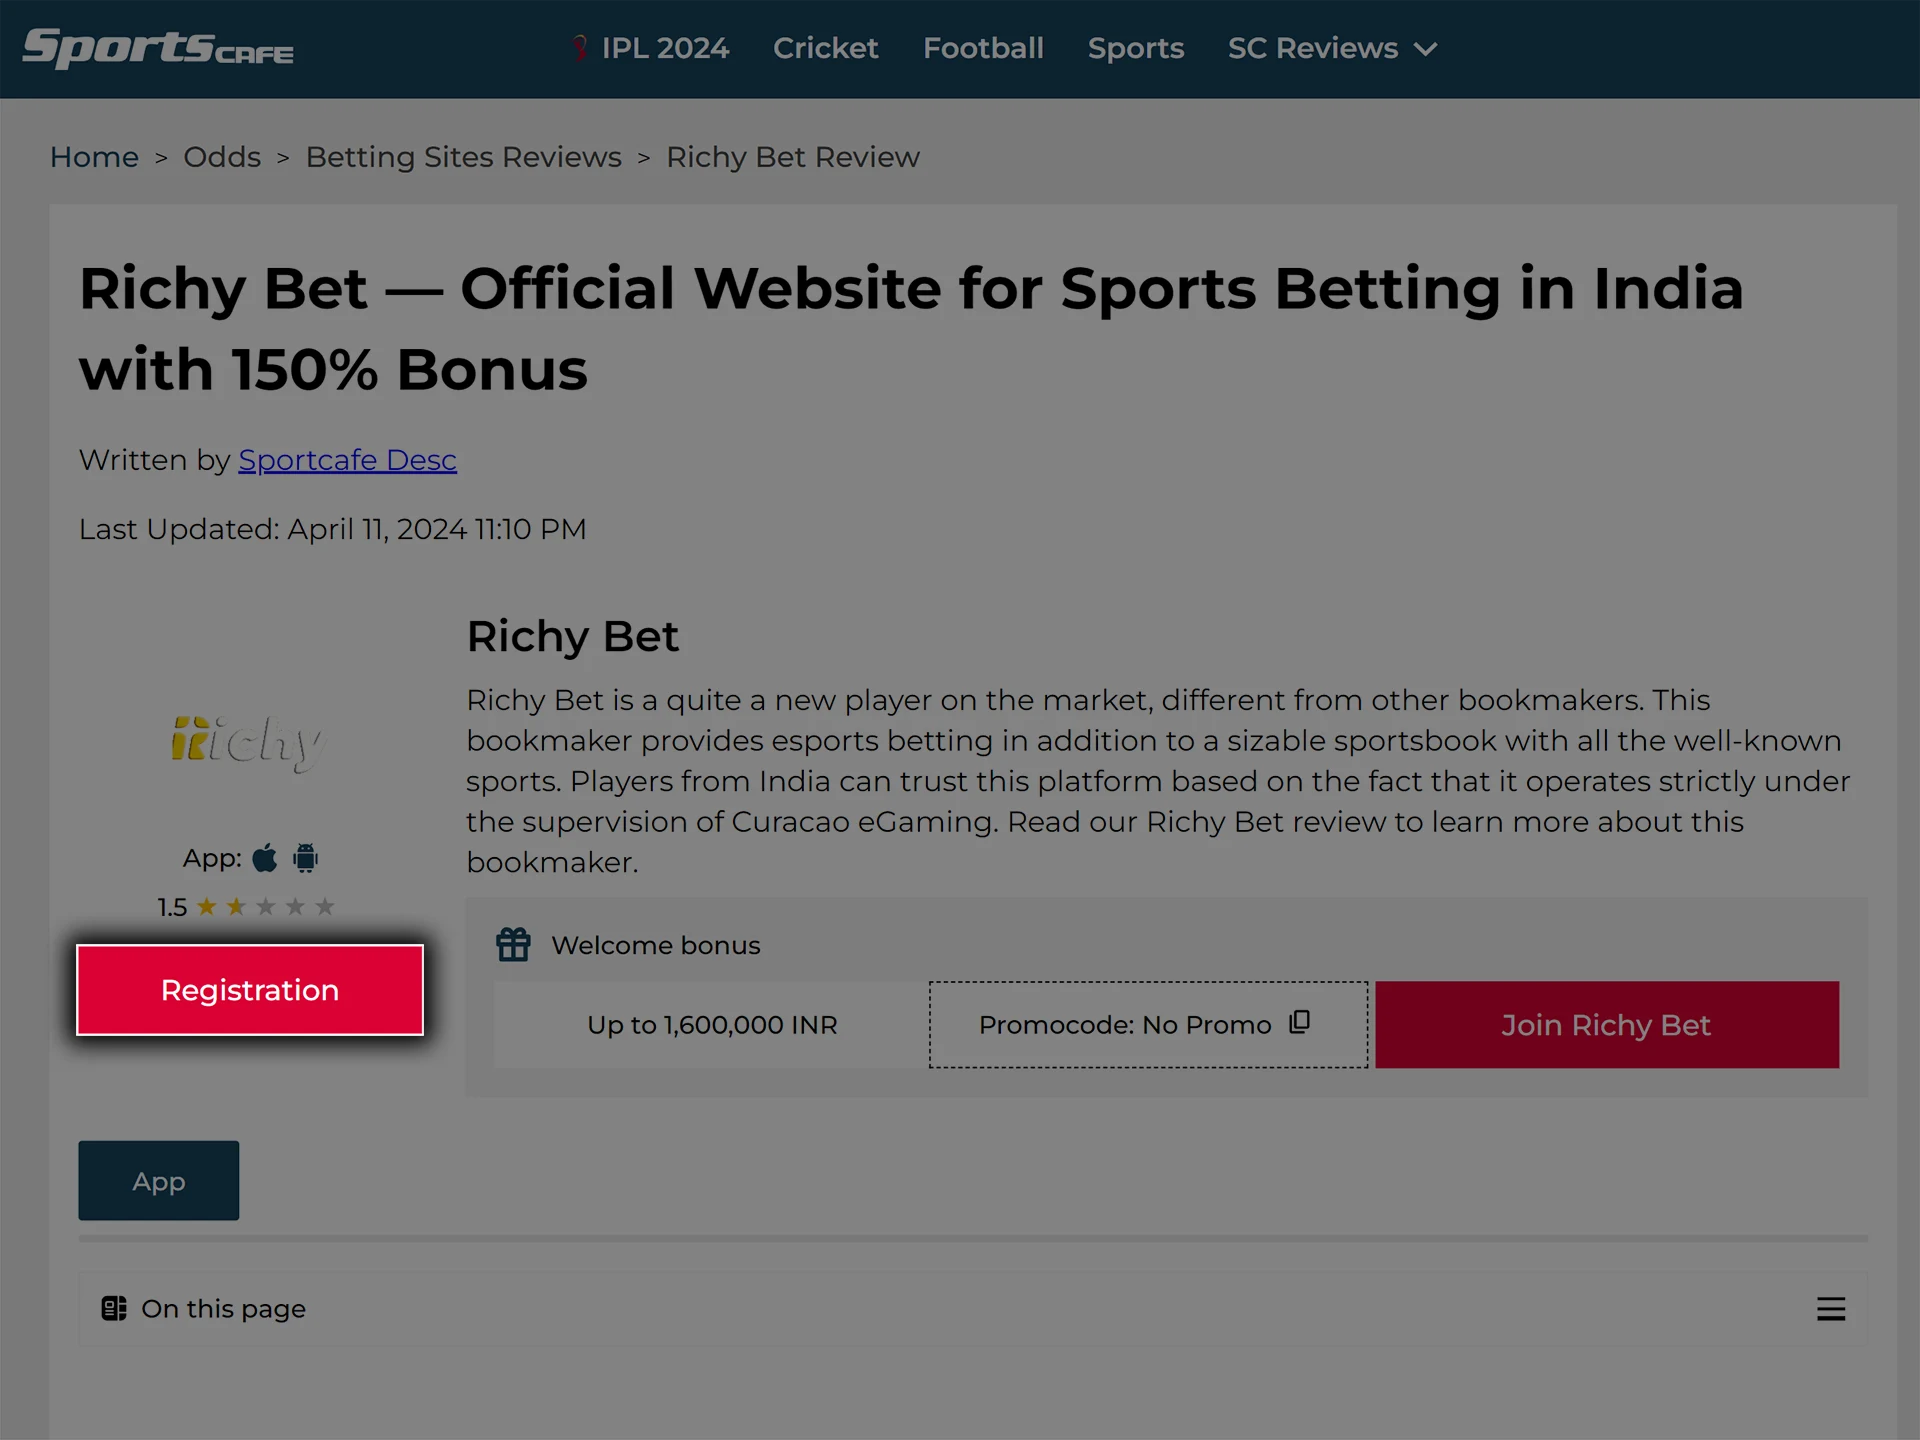 Use the link to open the Richy Bet website.